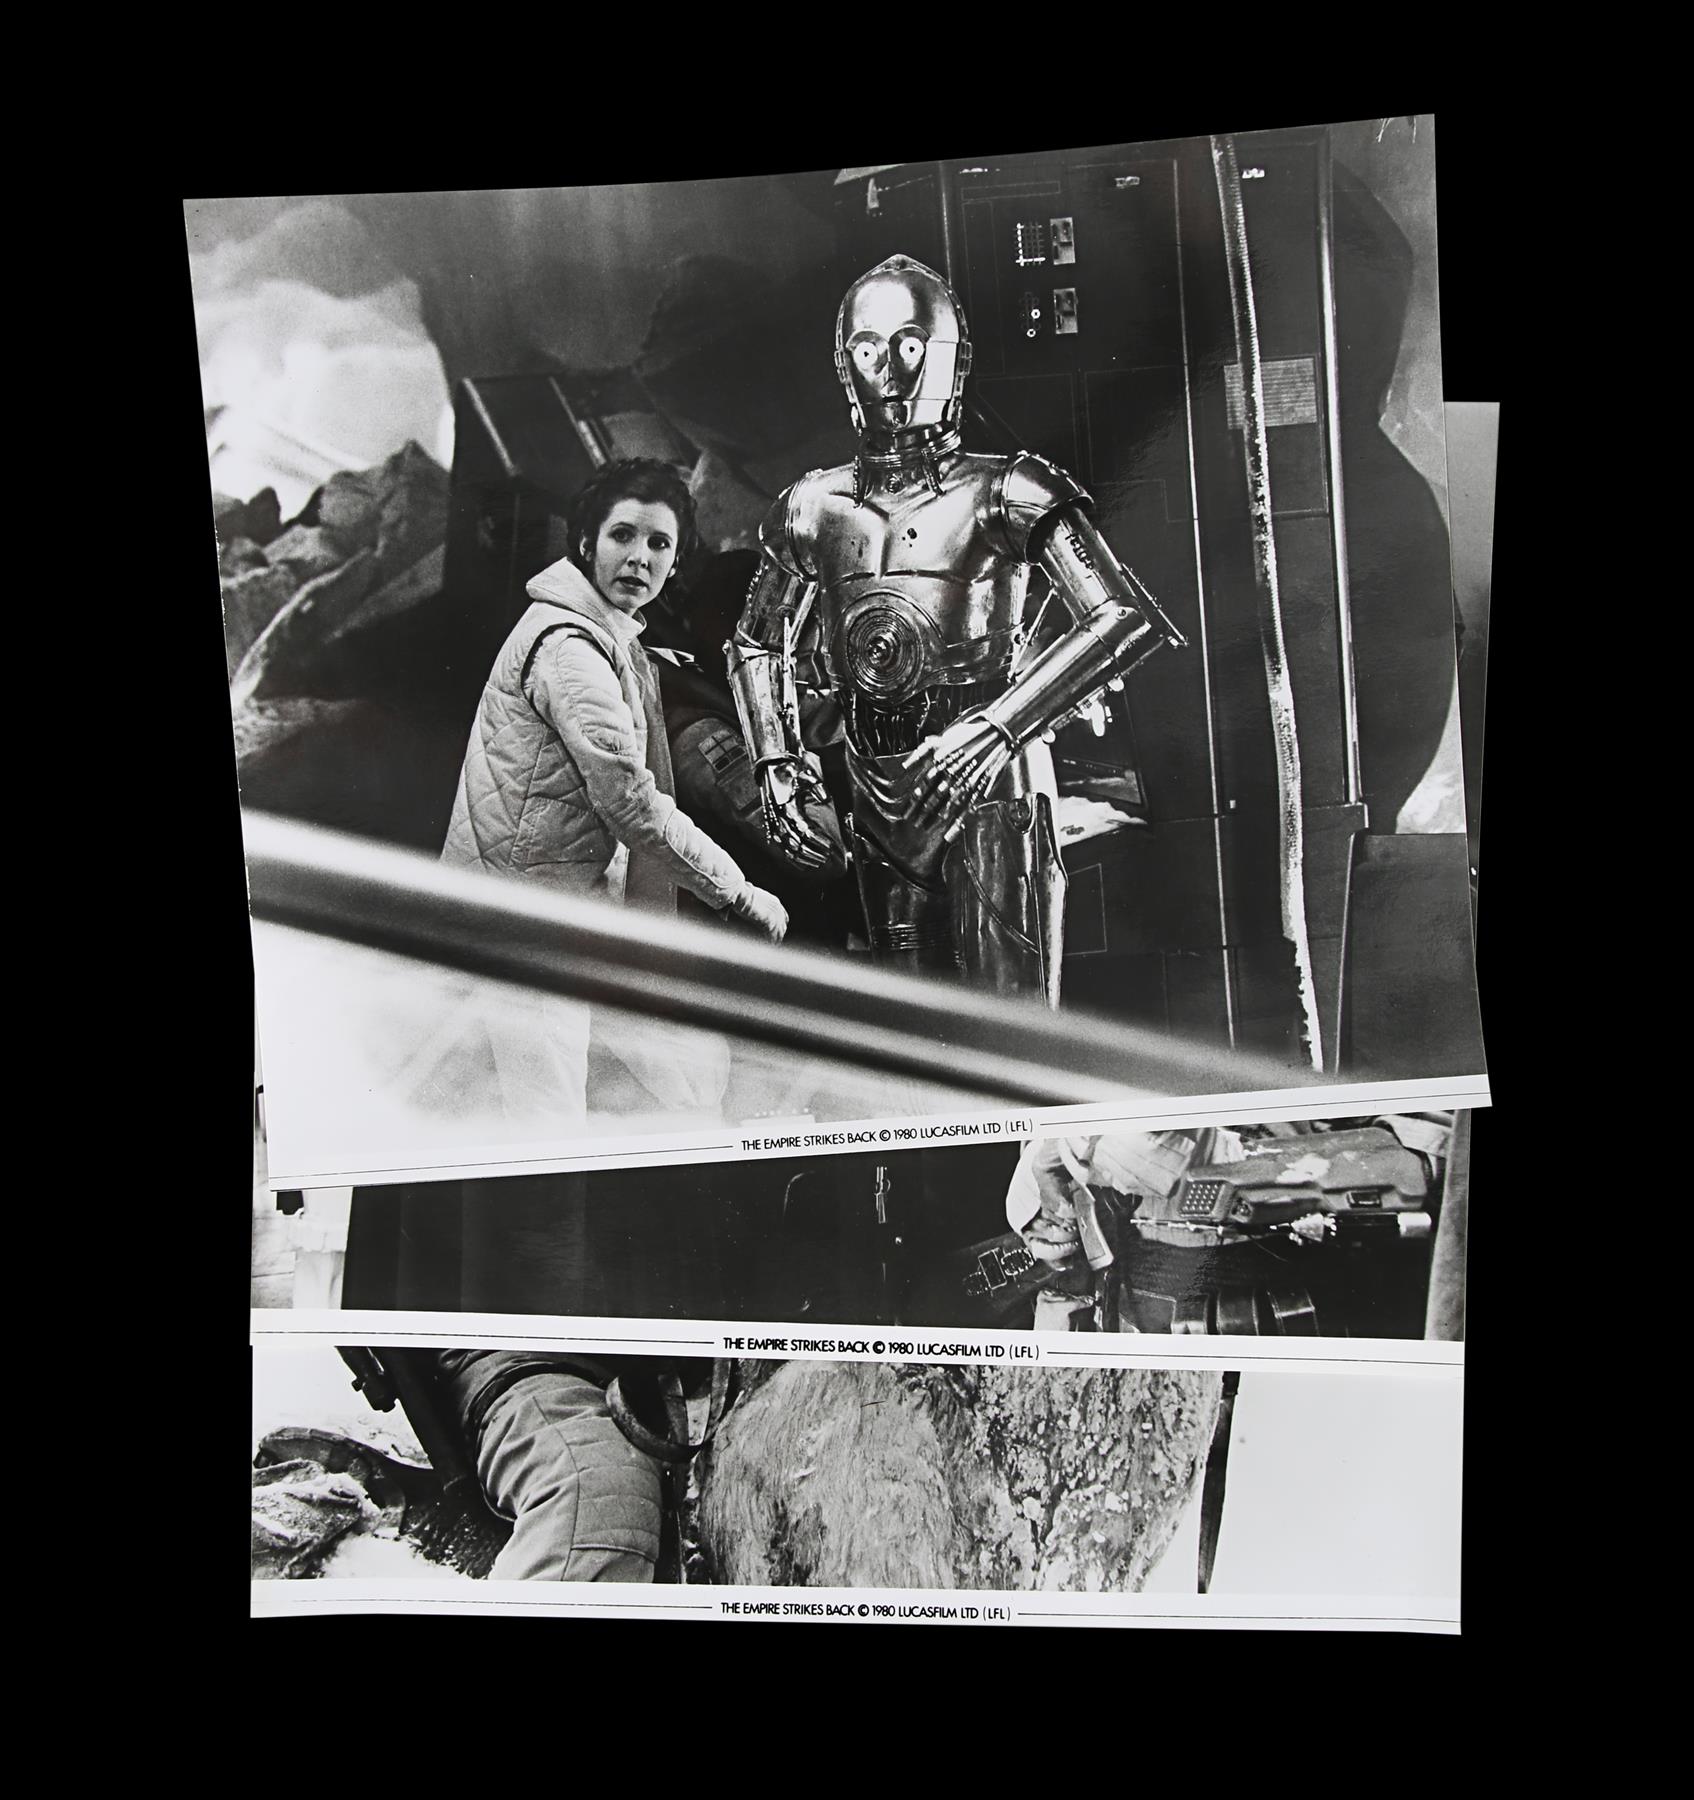 STAR WARS: THE EMPIRE STRIKES BACK (1980) - Set of Eight US Front of House Lobby Cards, 1980 - Image 3 of 6